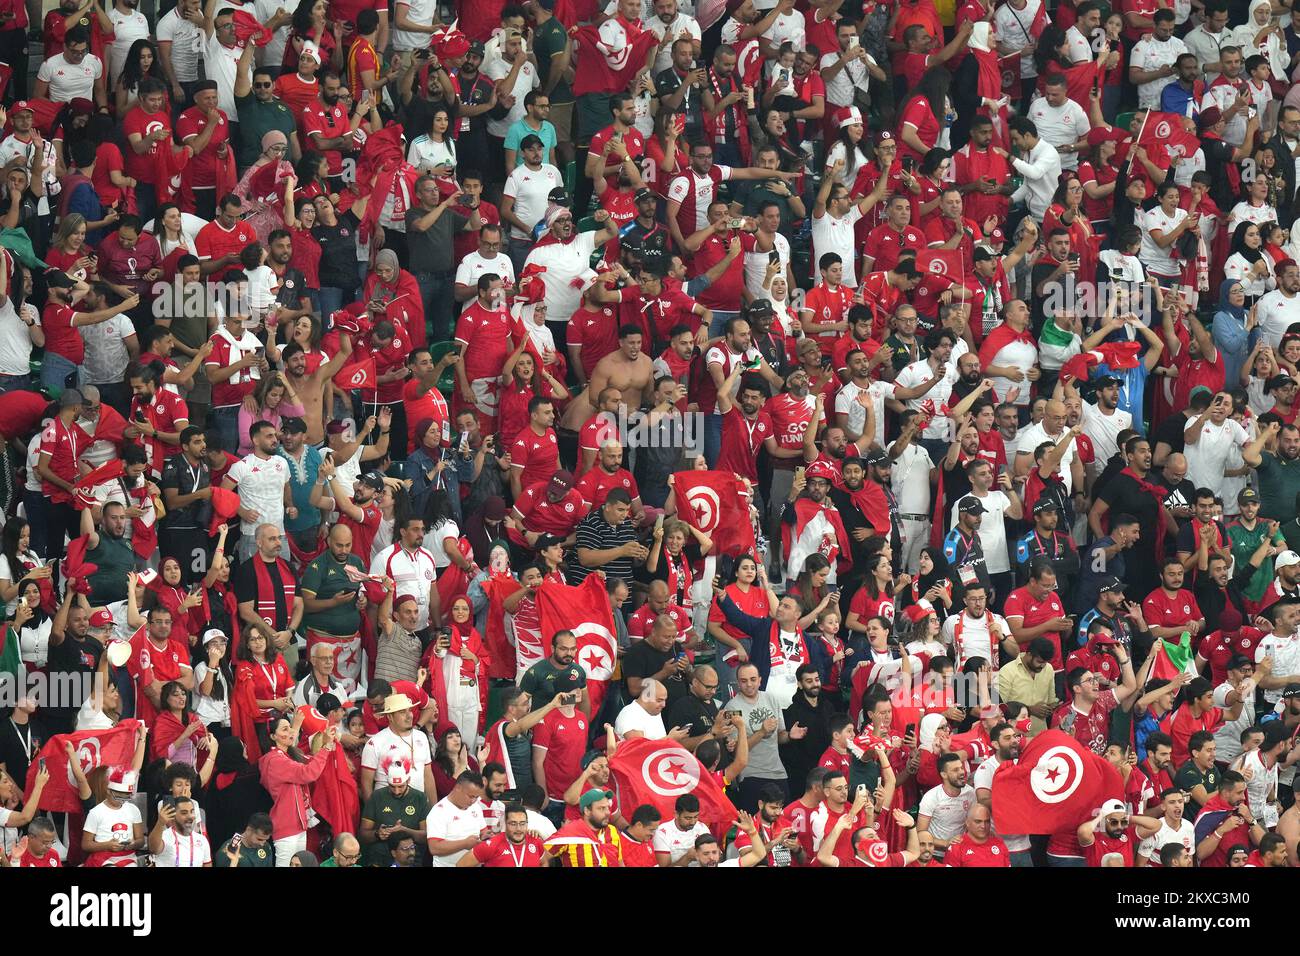 Tunisia's Wahbi Khazri celebrates scoring their side's first goal of the game with fans during the FIFA World Cup Group D match at the Education City Stadium in Al Rayyan, Qatar. Picture date: Wednesday November 30, 2022. Stock Photo